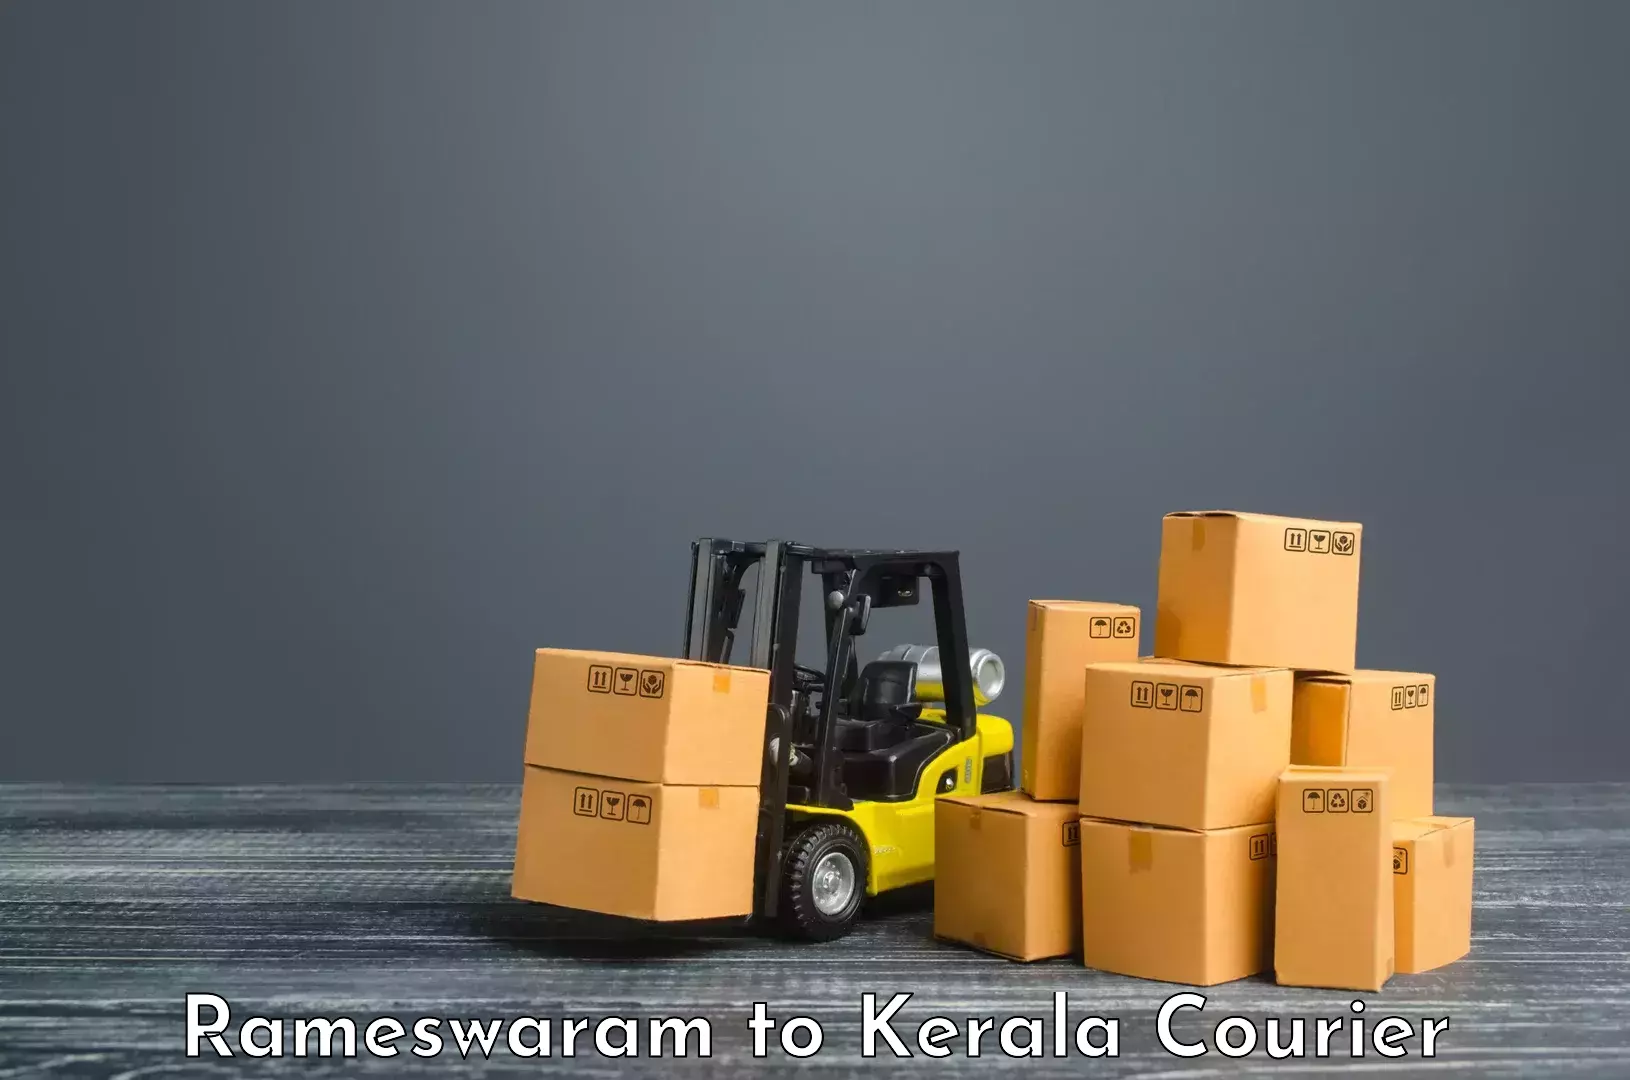 Reliable courier service Rameswaram to Pathanamthitta